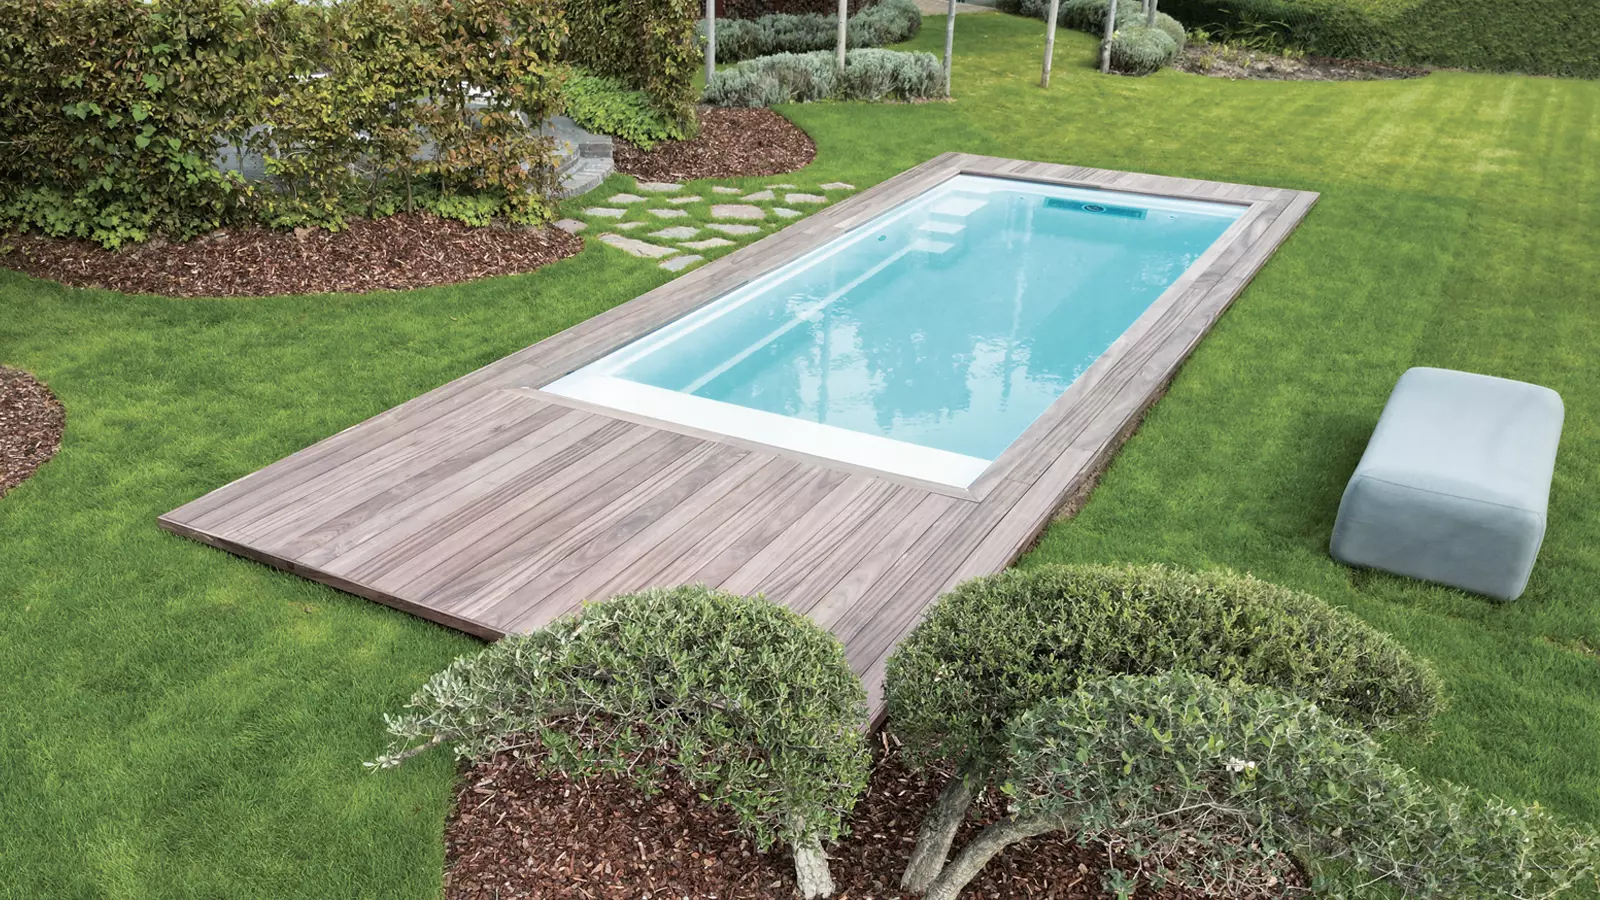 The Encore inground swimming pool model: maximized features. Compact design.